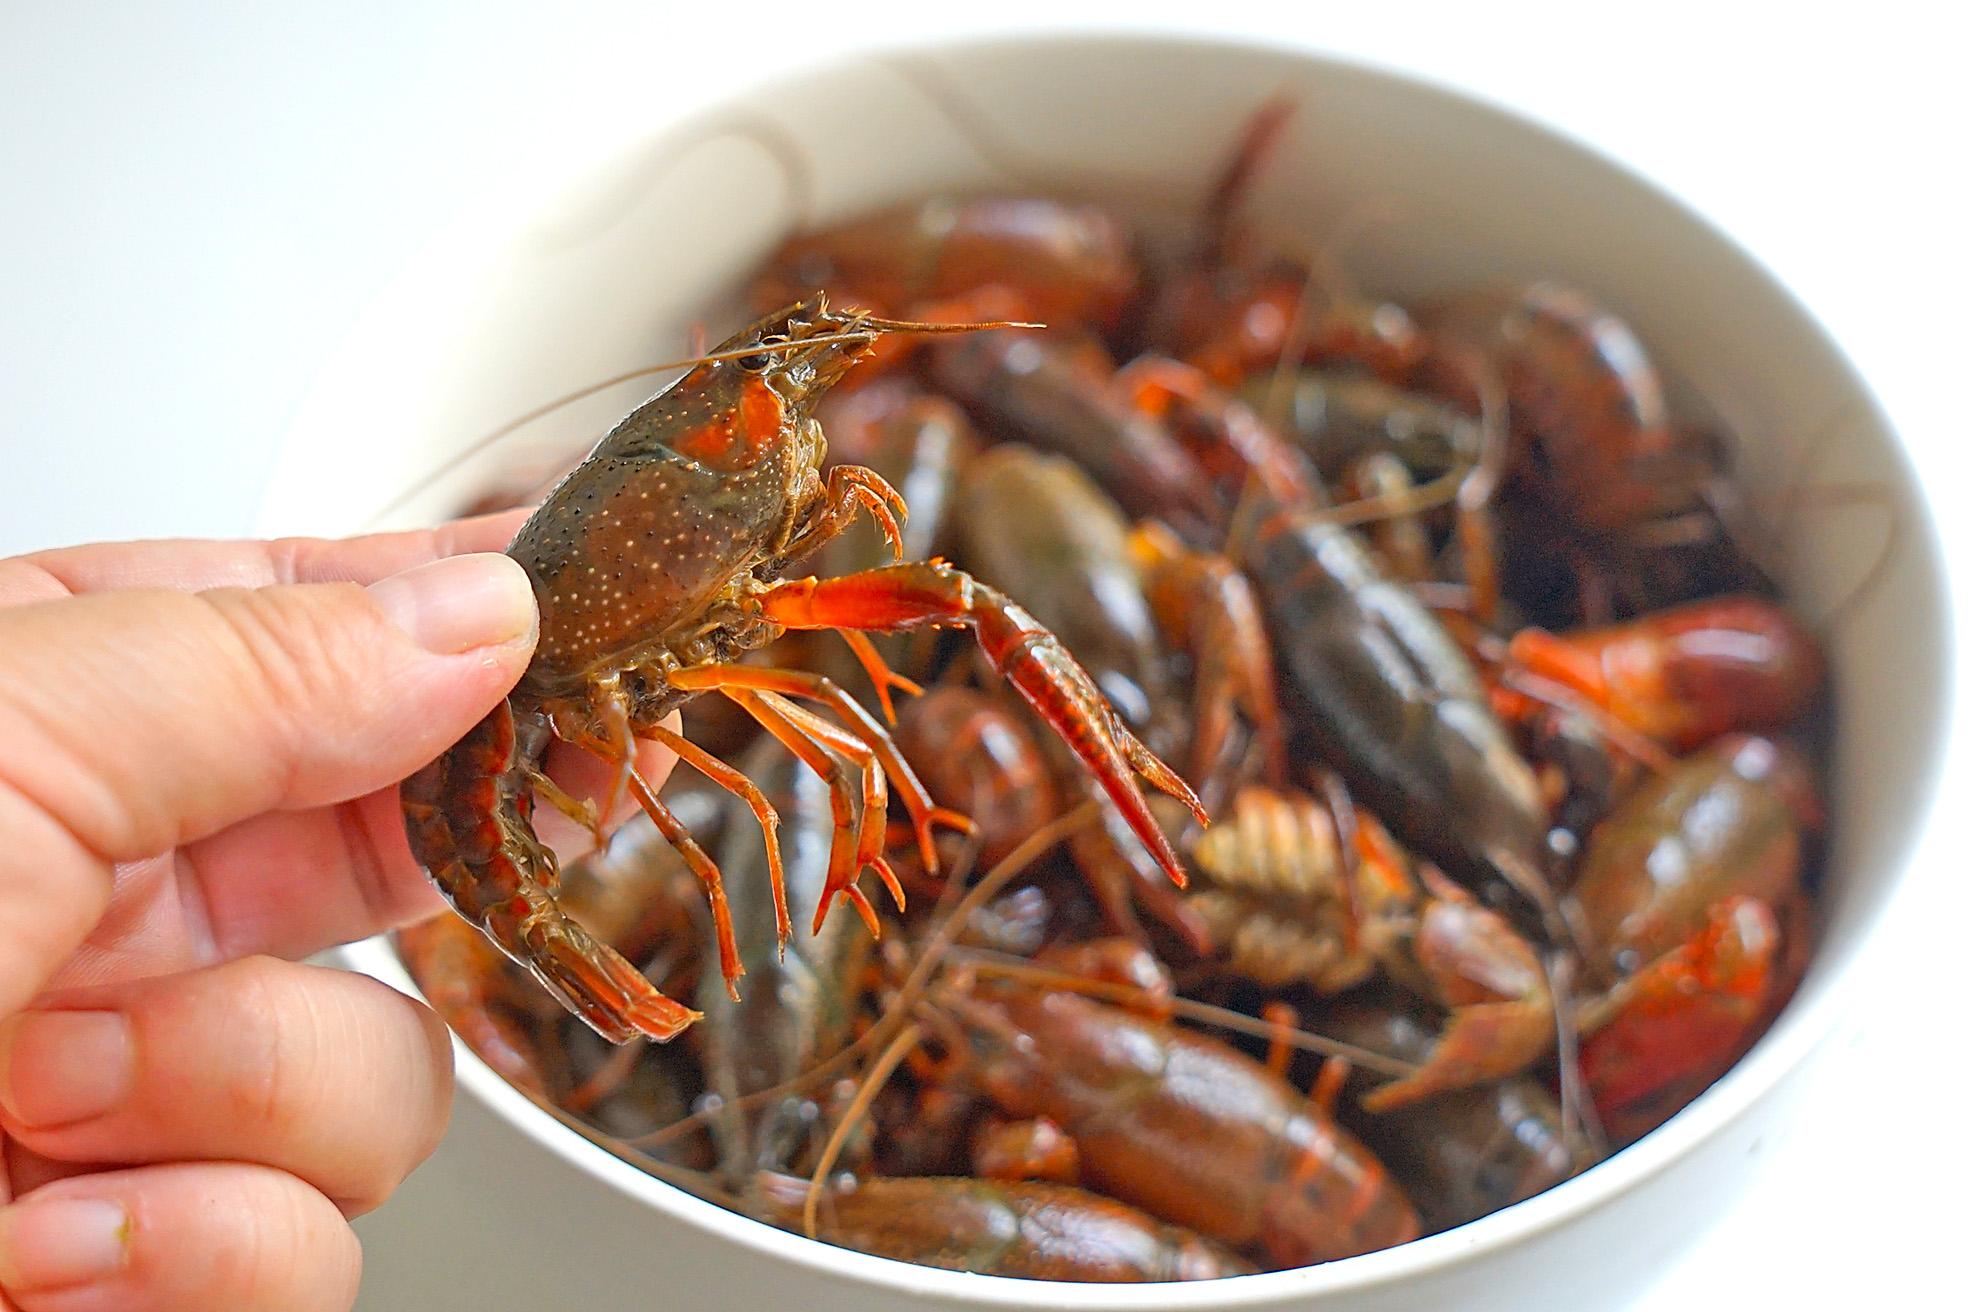 How to select crayfish